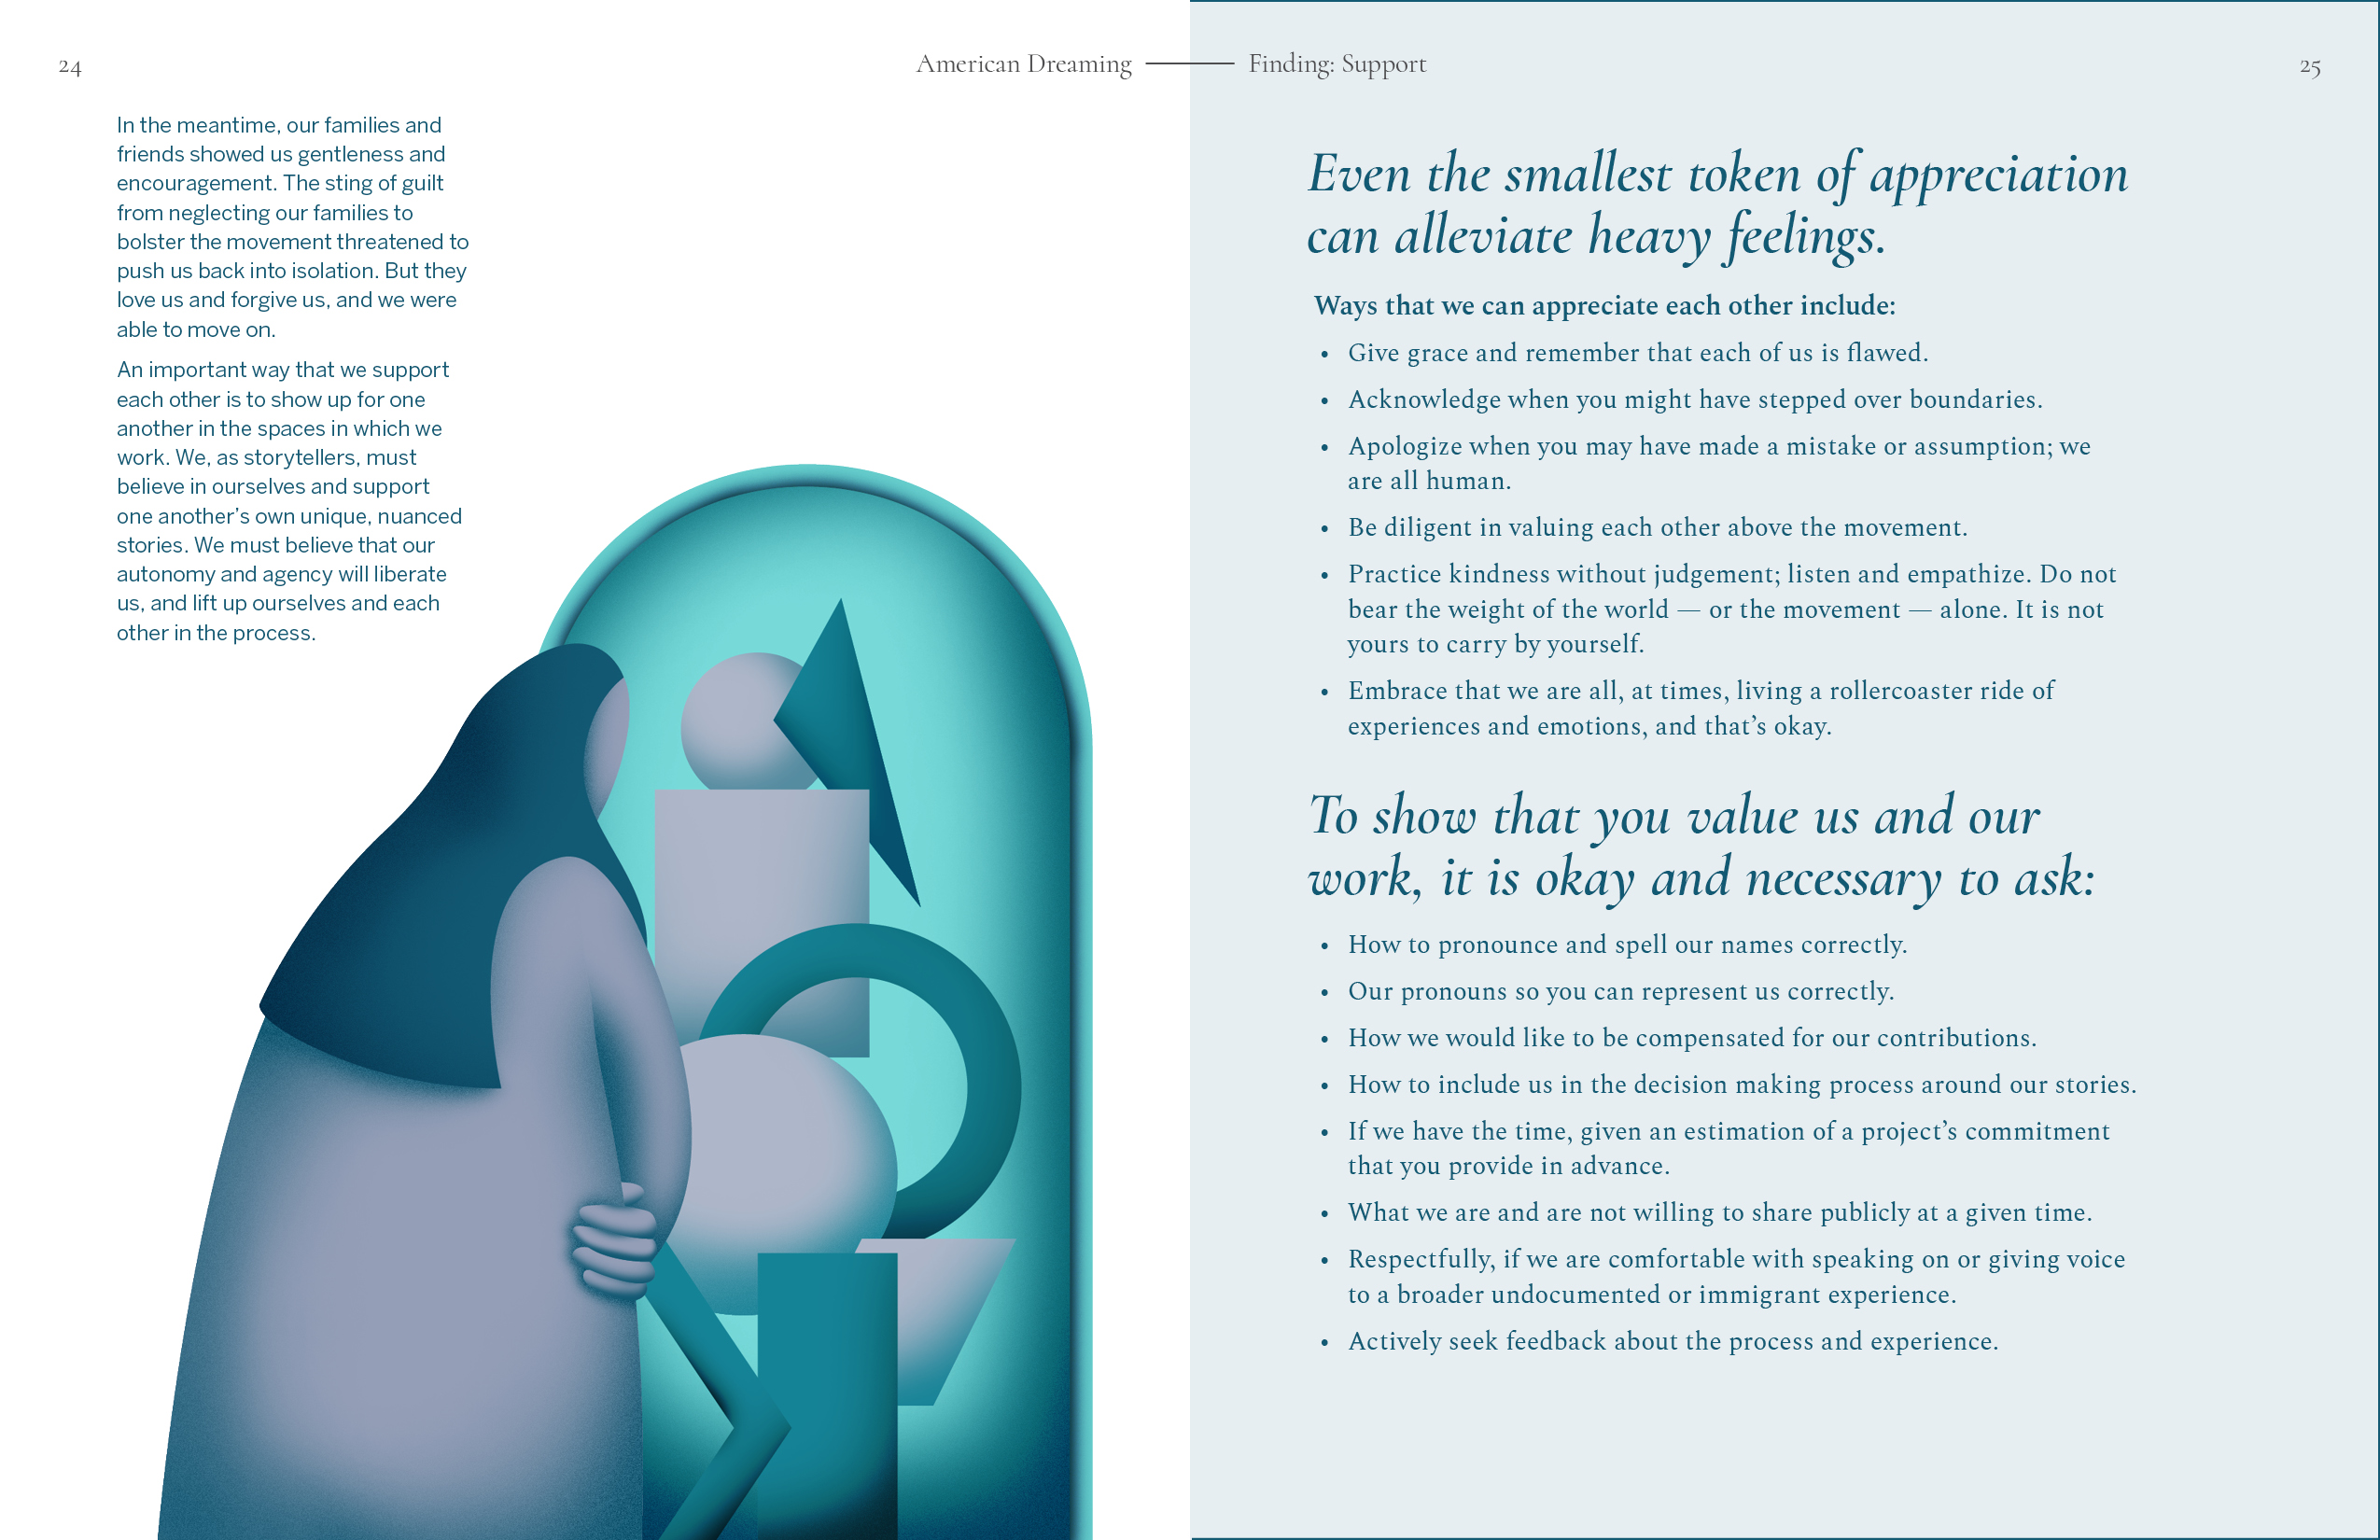 A spread with a soft cool-toned illustration of a woman looking in an arched mirror. Her reflection is a wobbly-looking stack of abstract shapes.